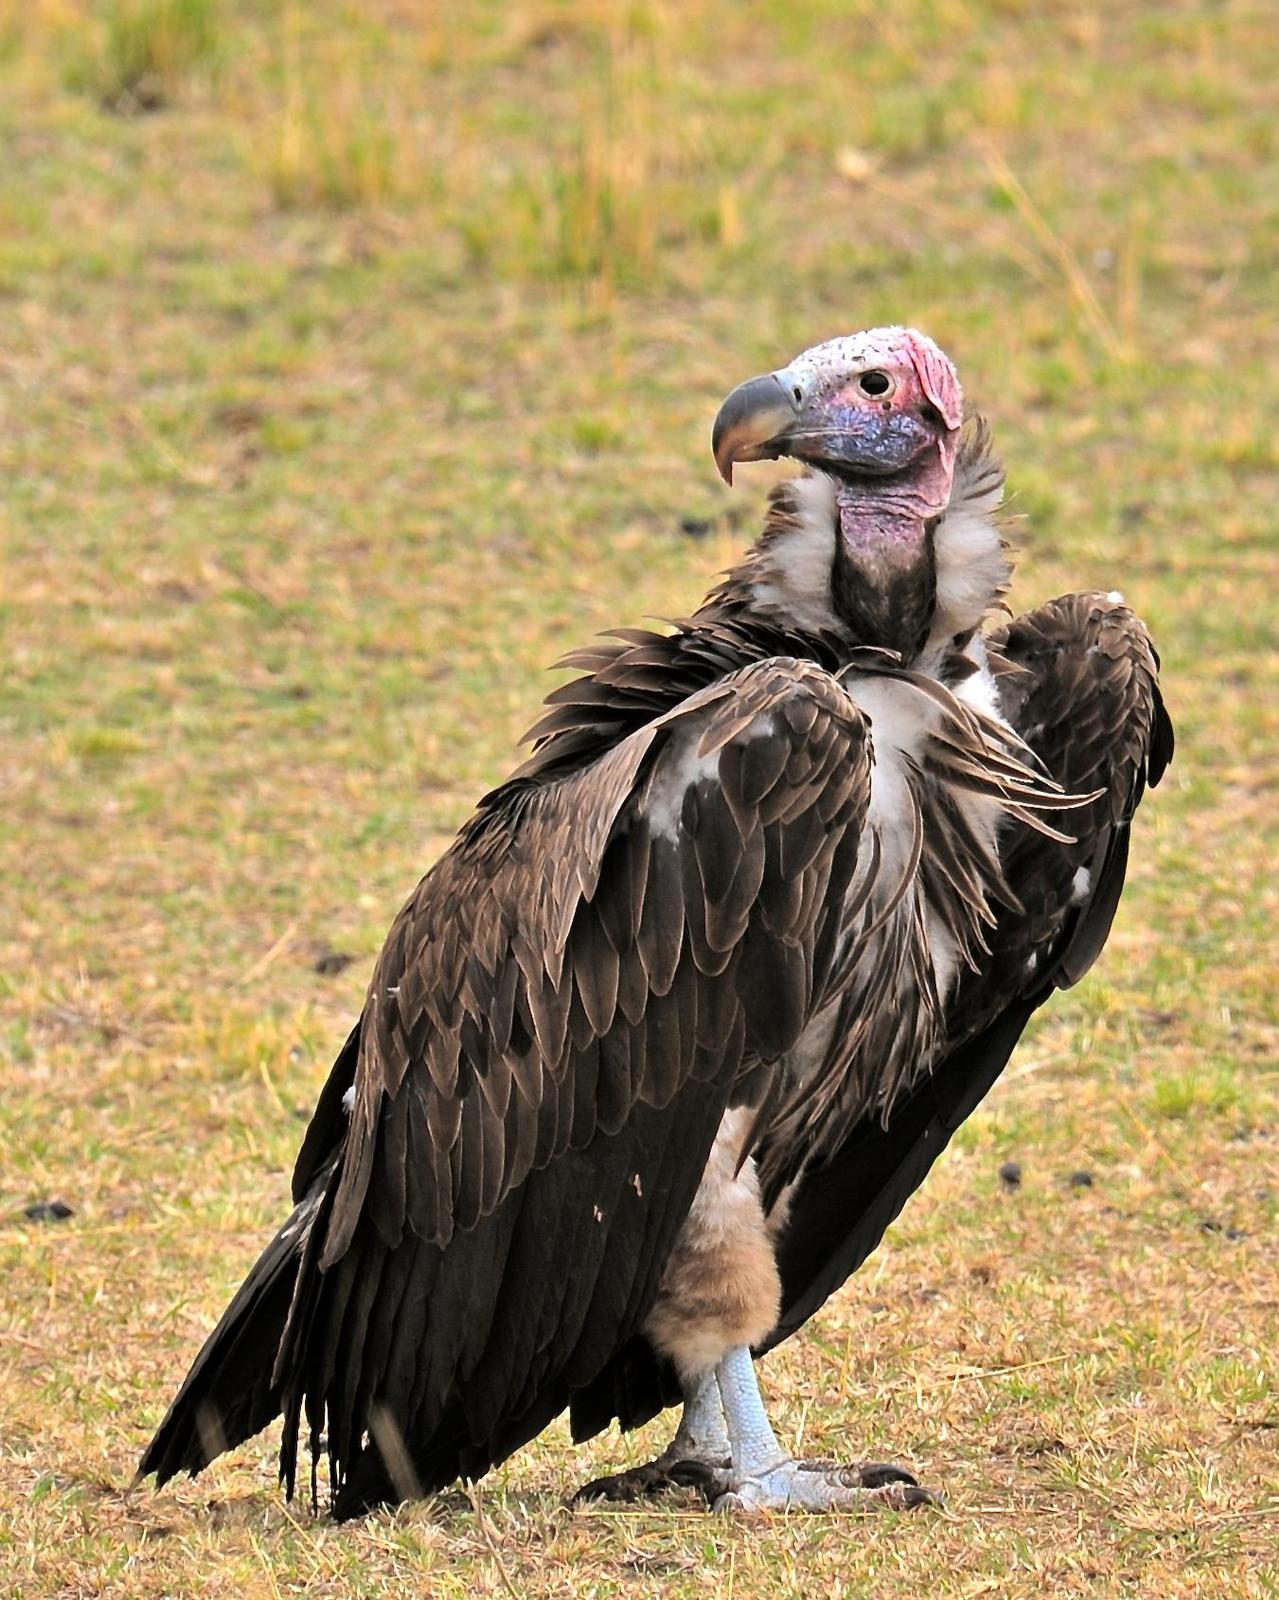 Lappet-faced Vulture Photo by Gerald Friesen